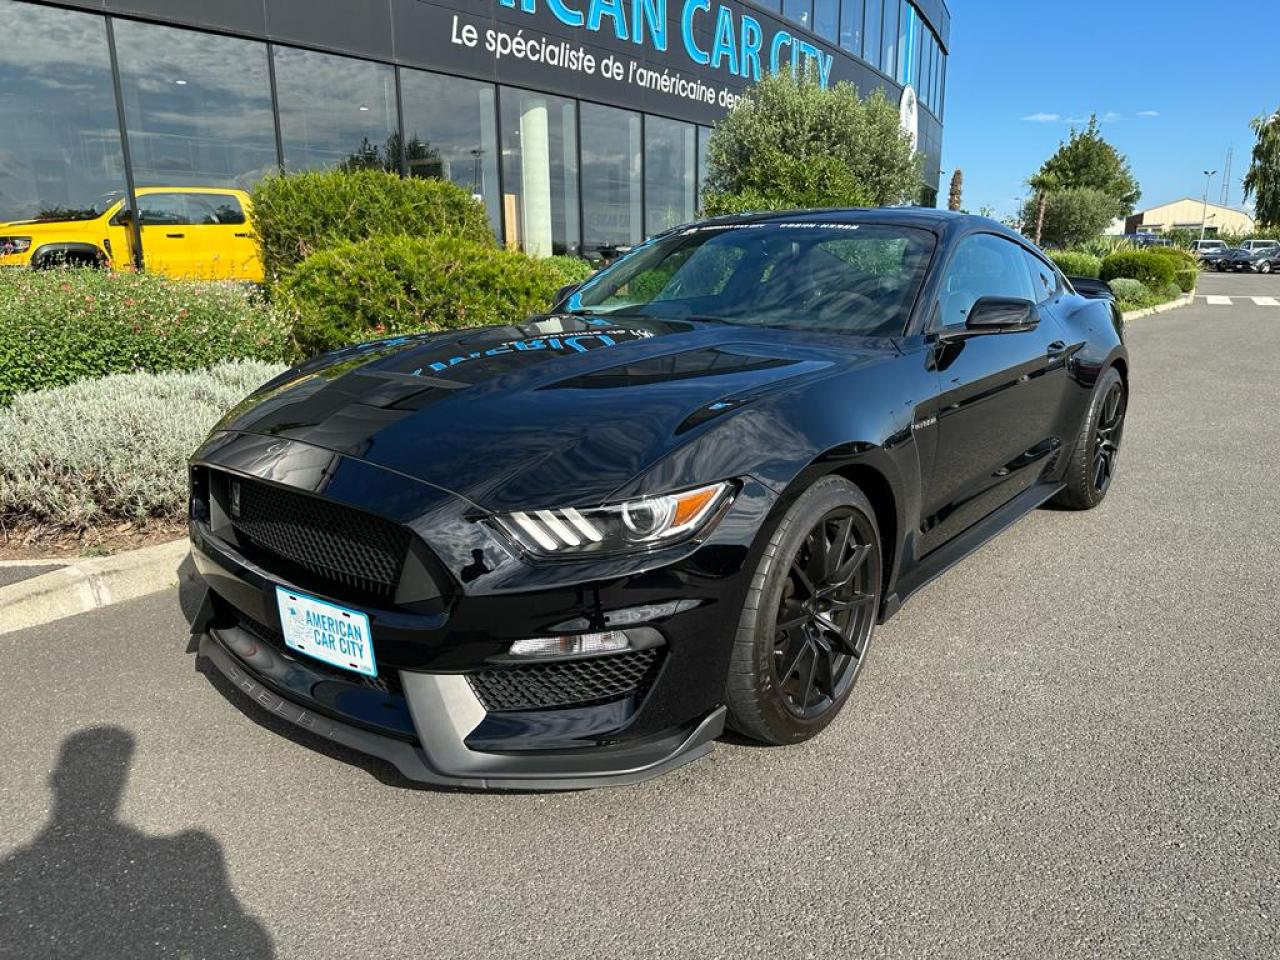 FORD MUSTANG SHELBY GT350 5.2L V8 - PAS DE MALUS